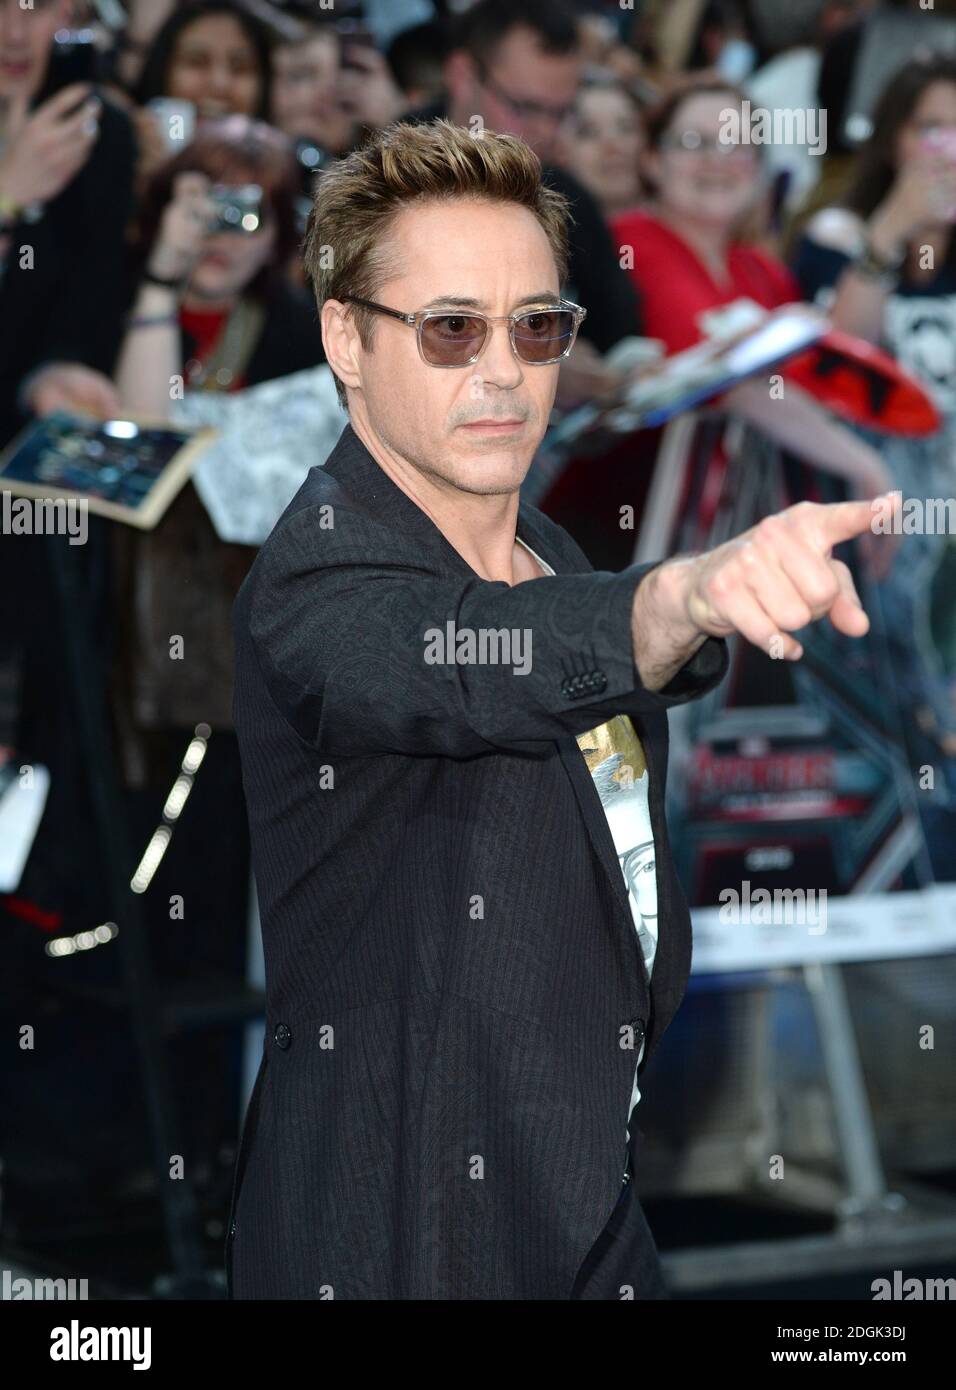 Robert Downey Jr (Tony Stark/ Iron Man) attending Marvel Avengers: The Age  Of Ultron European Film Premiere held at the VUE cinema in Westfield,  London Stock Photo - Alamy